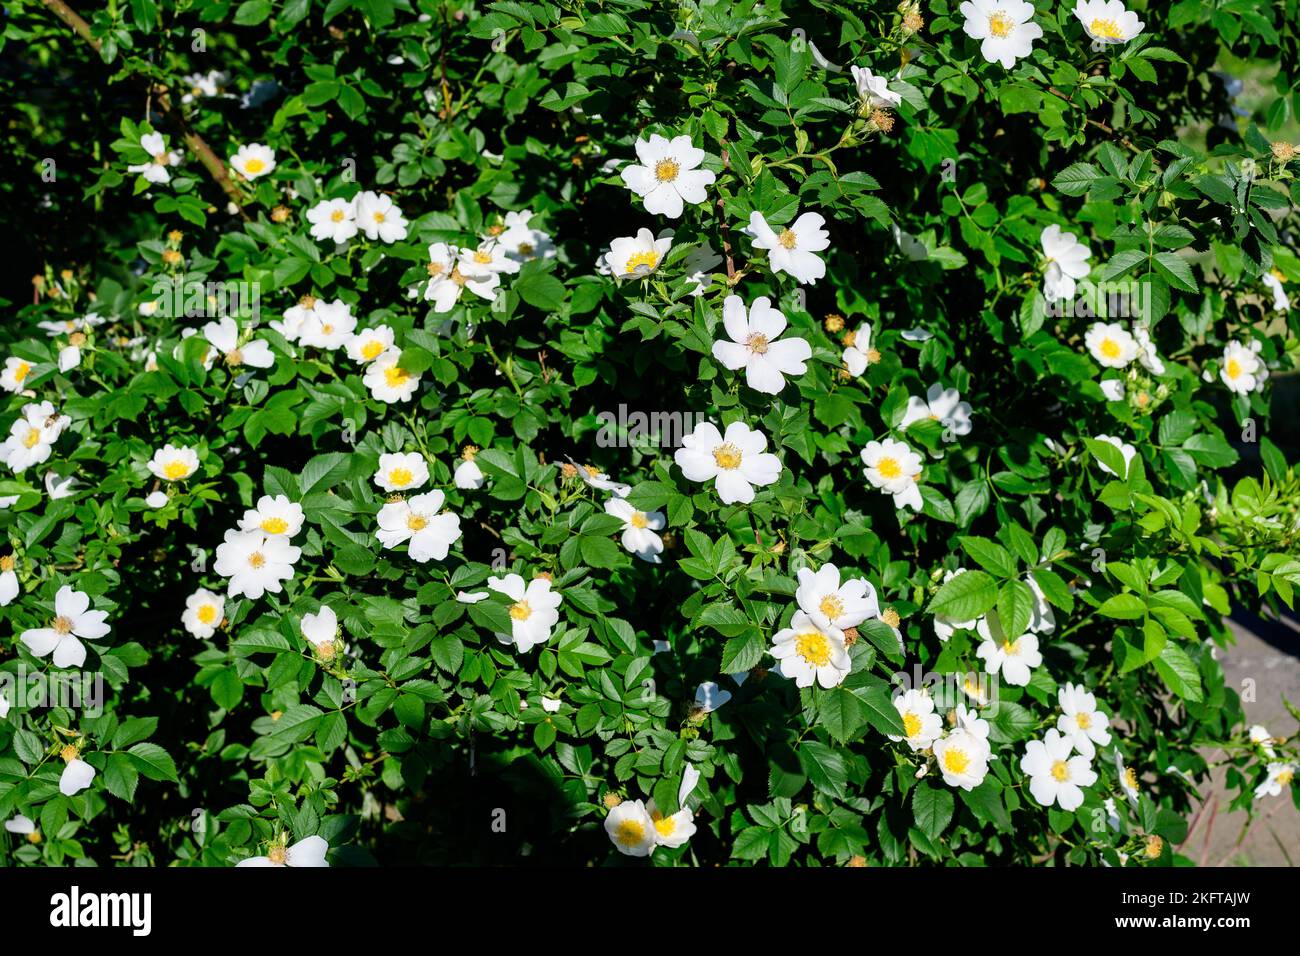 Large bush with delicate light pink and white Rosa Canina wild flowers in full bloom and green leaves, near a forest, in a sunny summer day Stock Photo